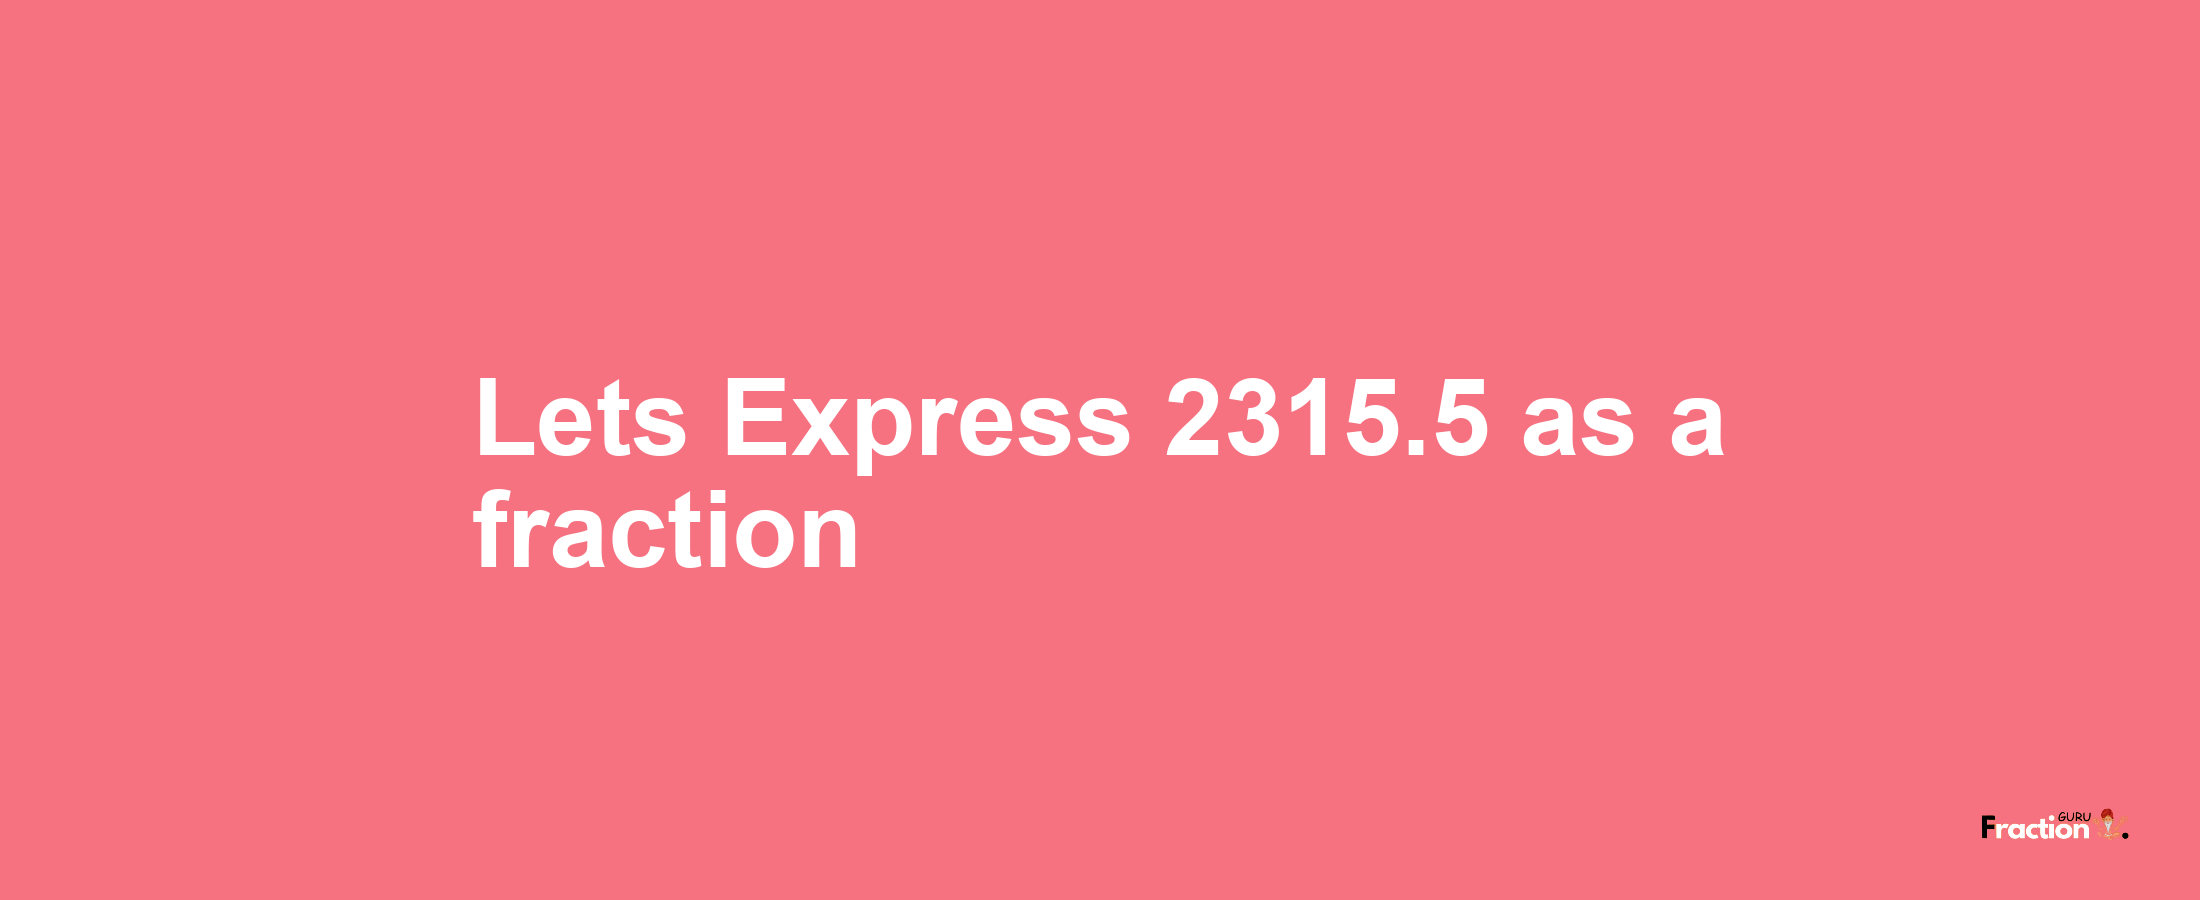 Lets Express 2315.5 as afraction